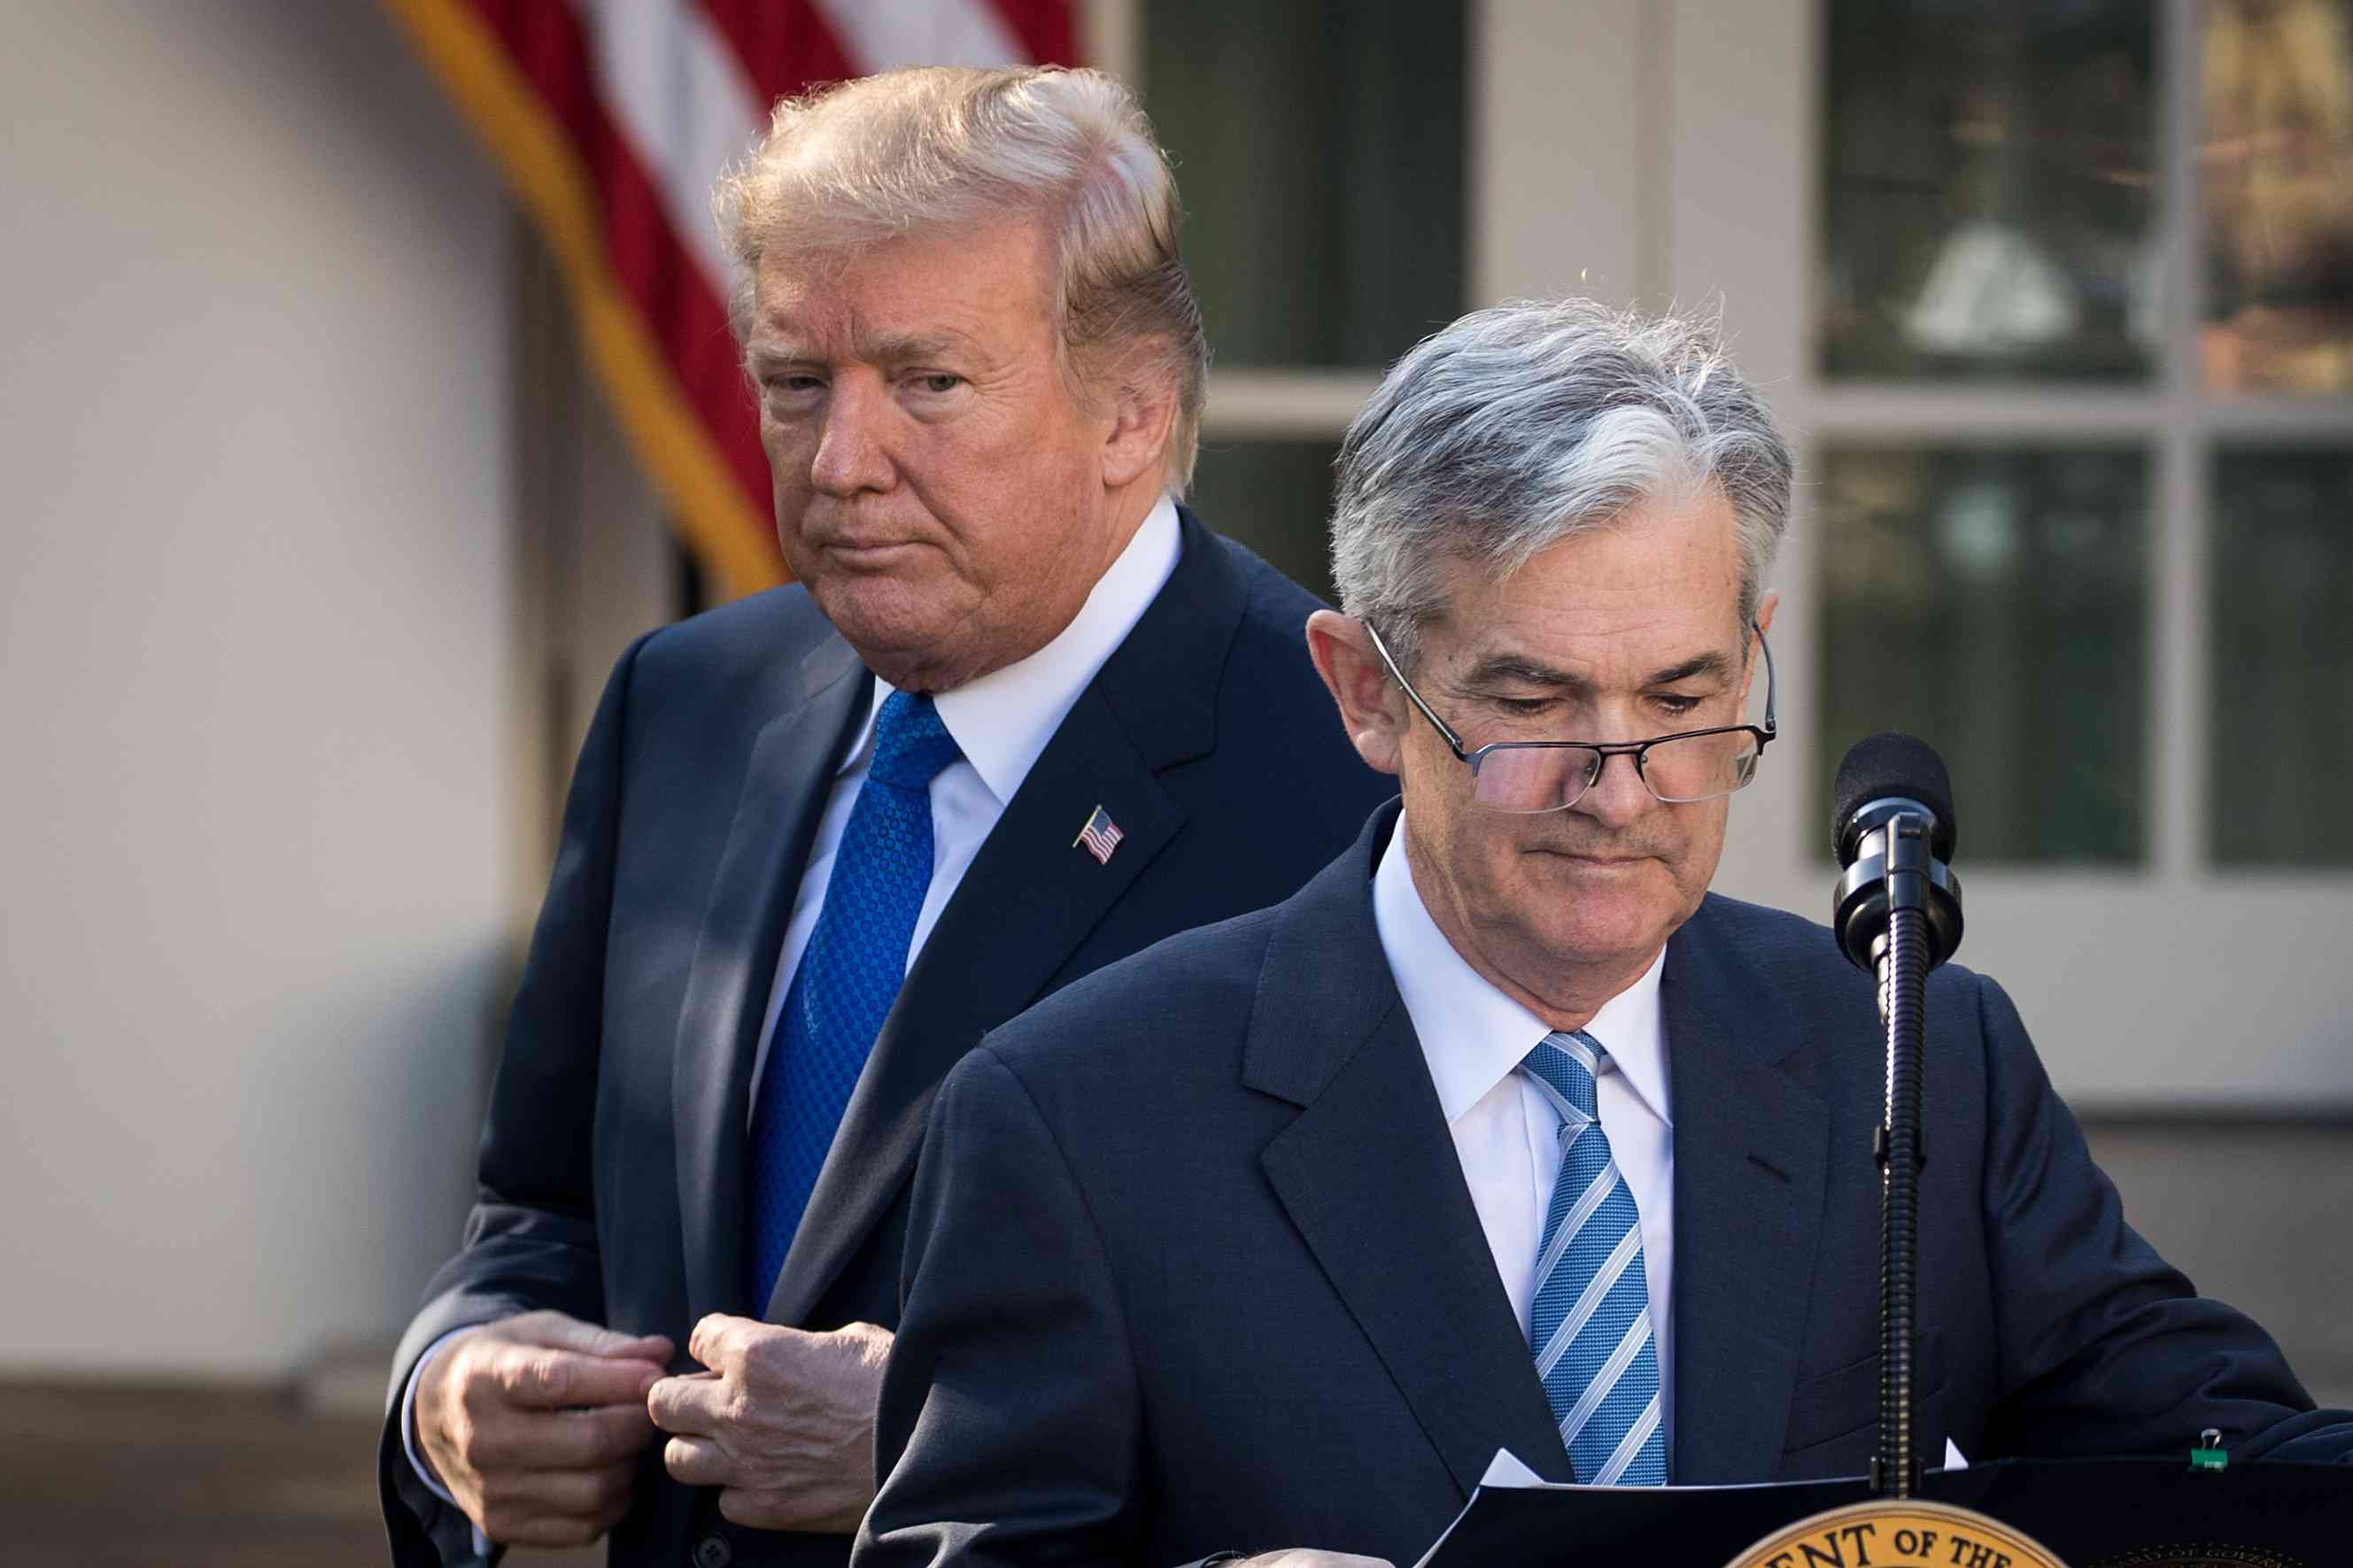 U.S. President Donald Trump looks on as his nominee for the chairman of the Federal Reserve Jerome Powell takes to the podium during a press event in the Rose Garden at the White House, November 2, 2017 in Washington, DC. 